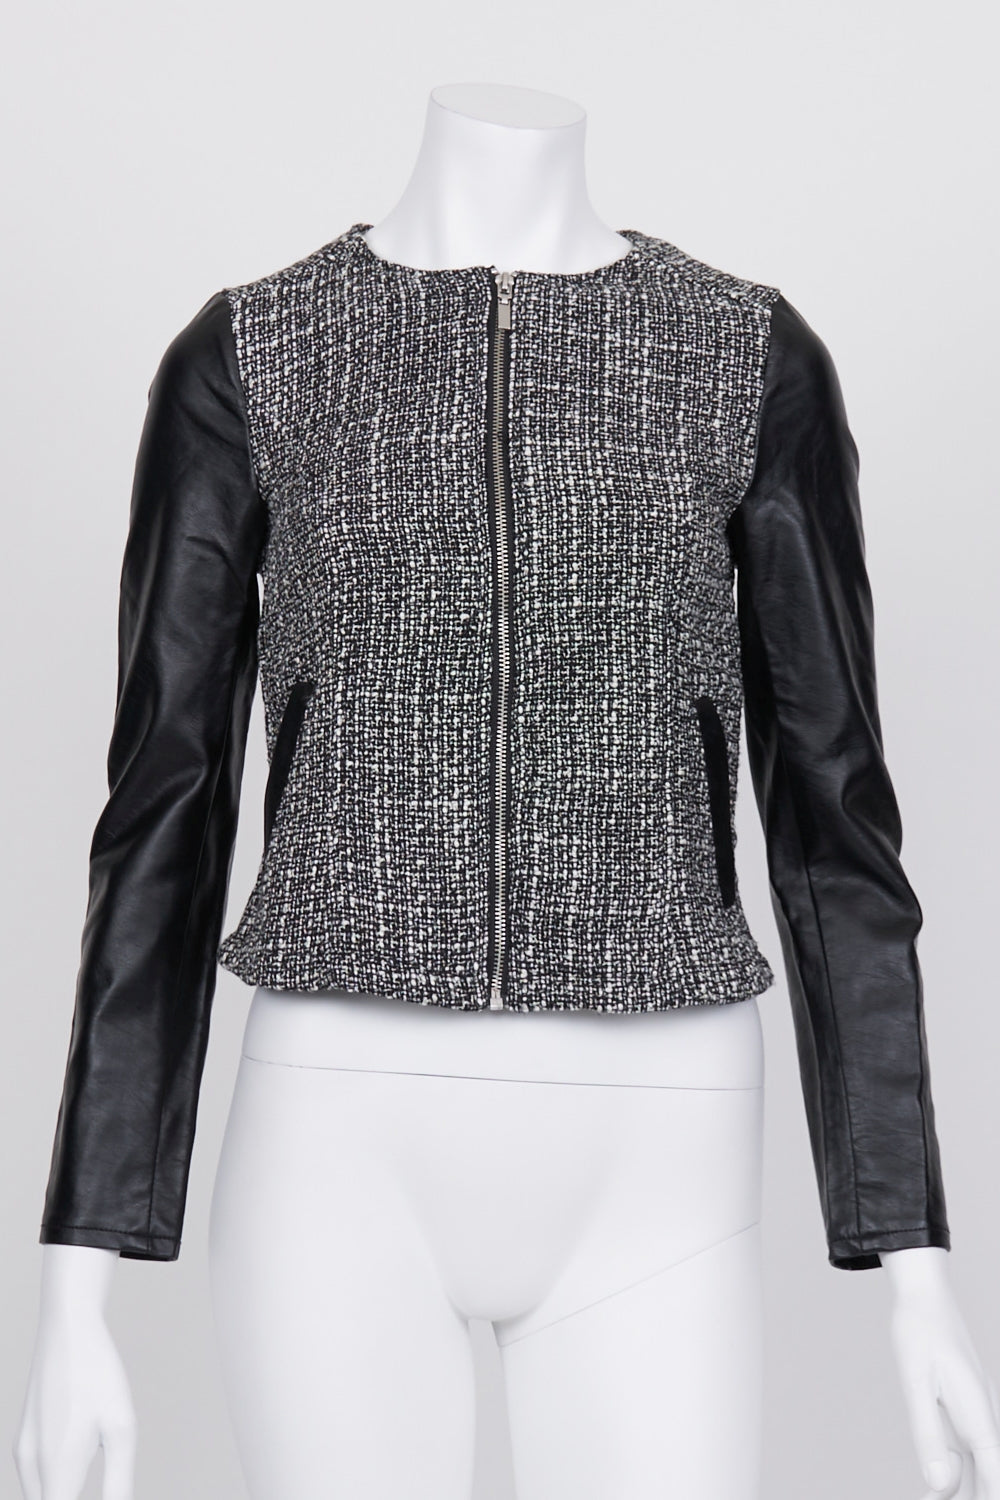 H&amp;M Black And White Patterned Jacket 4